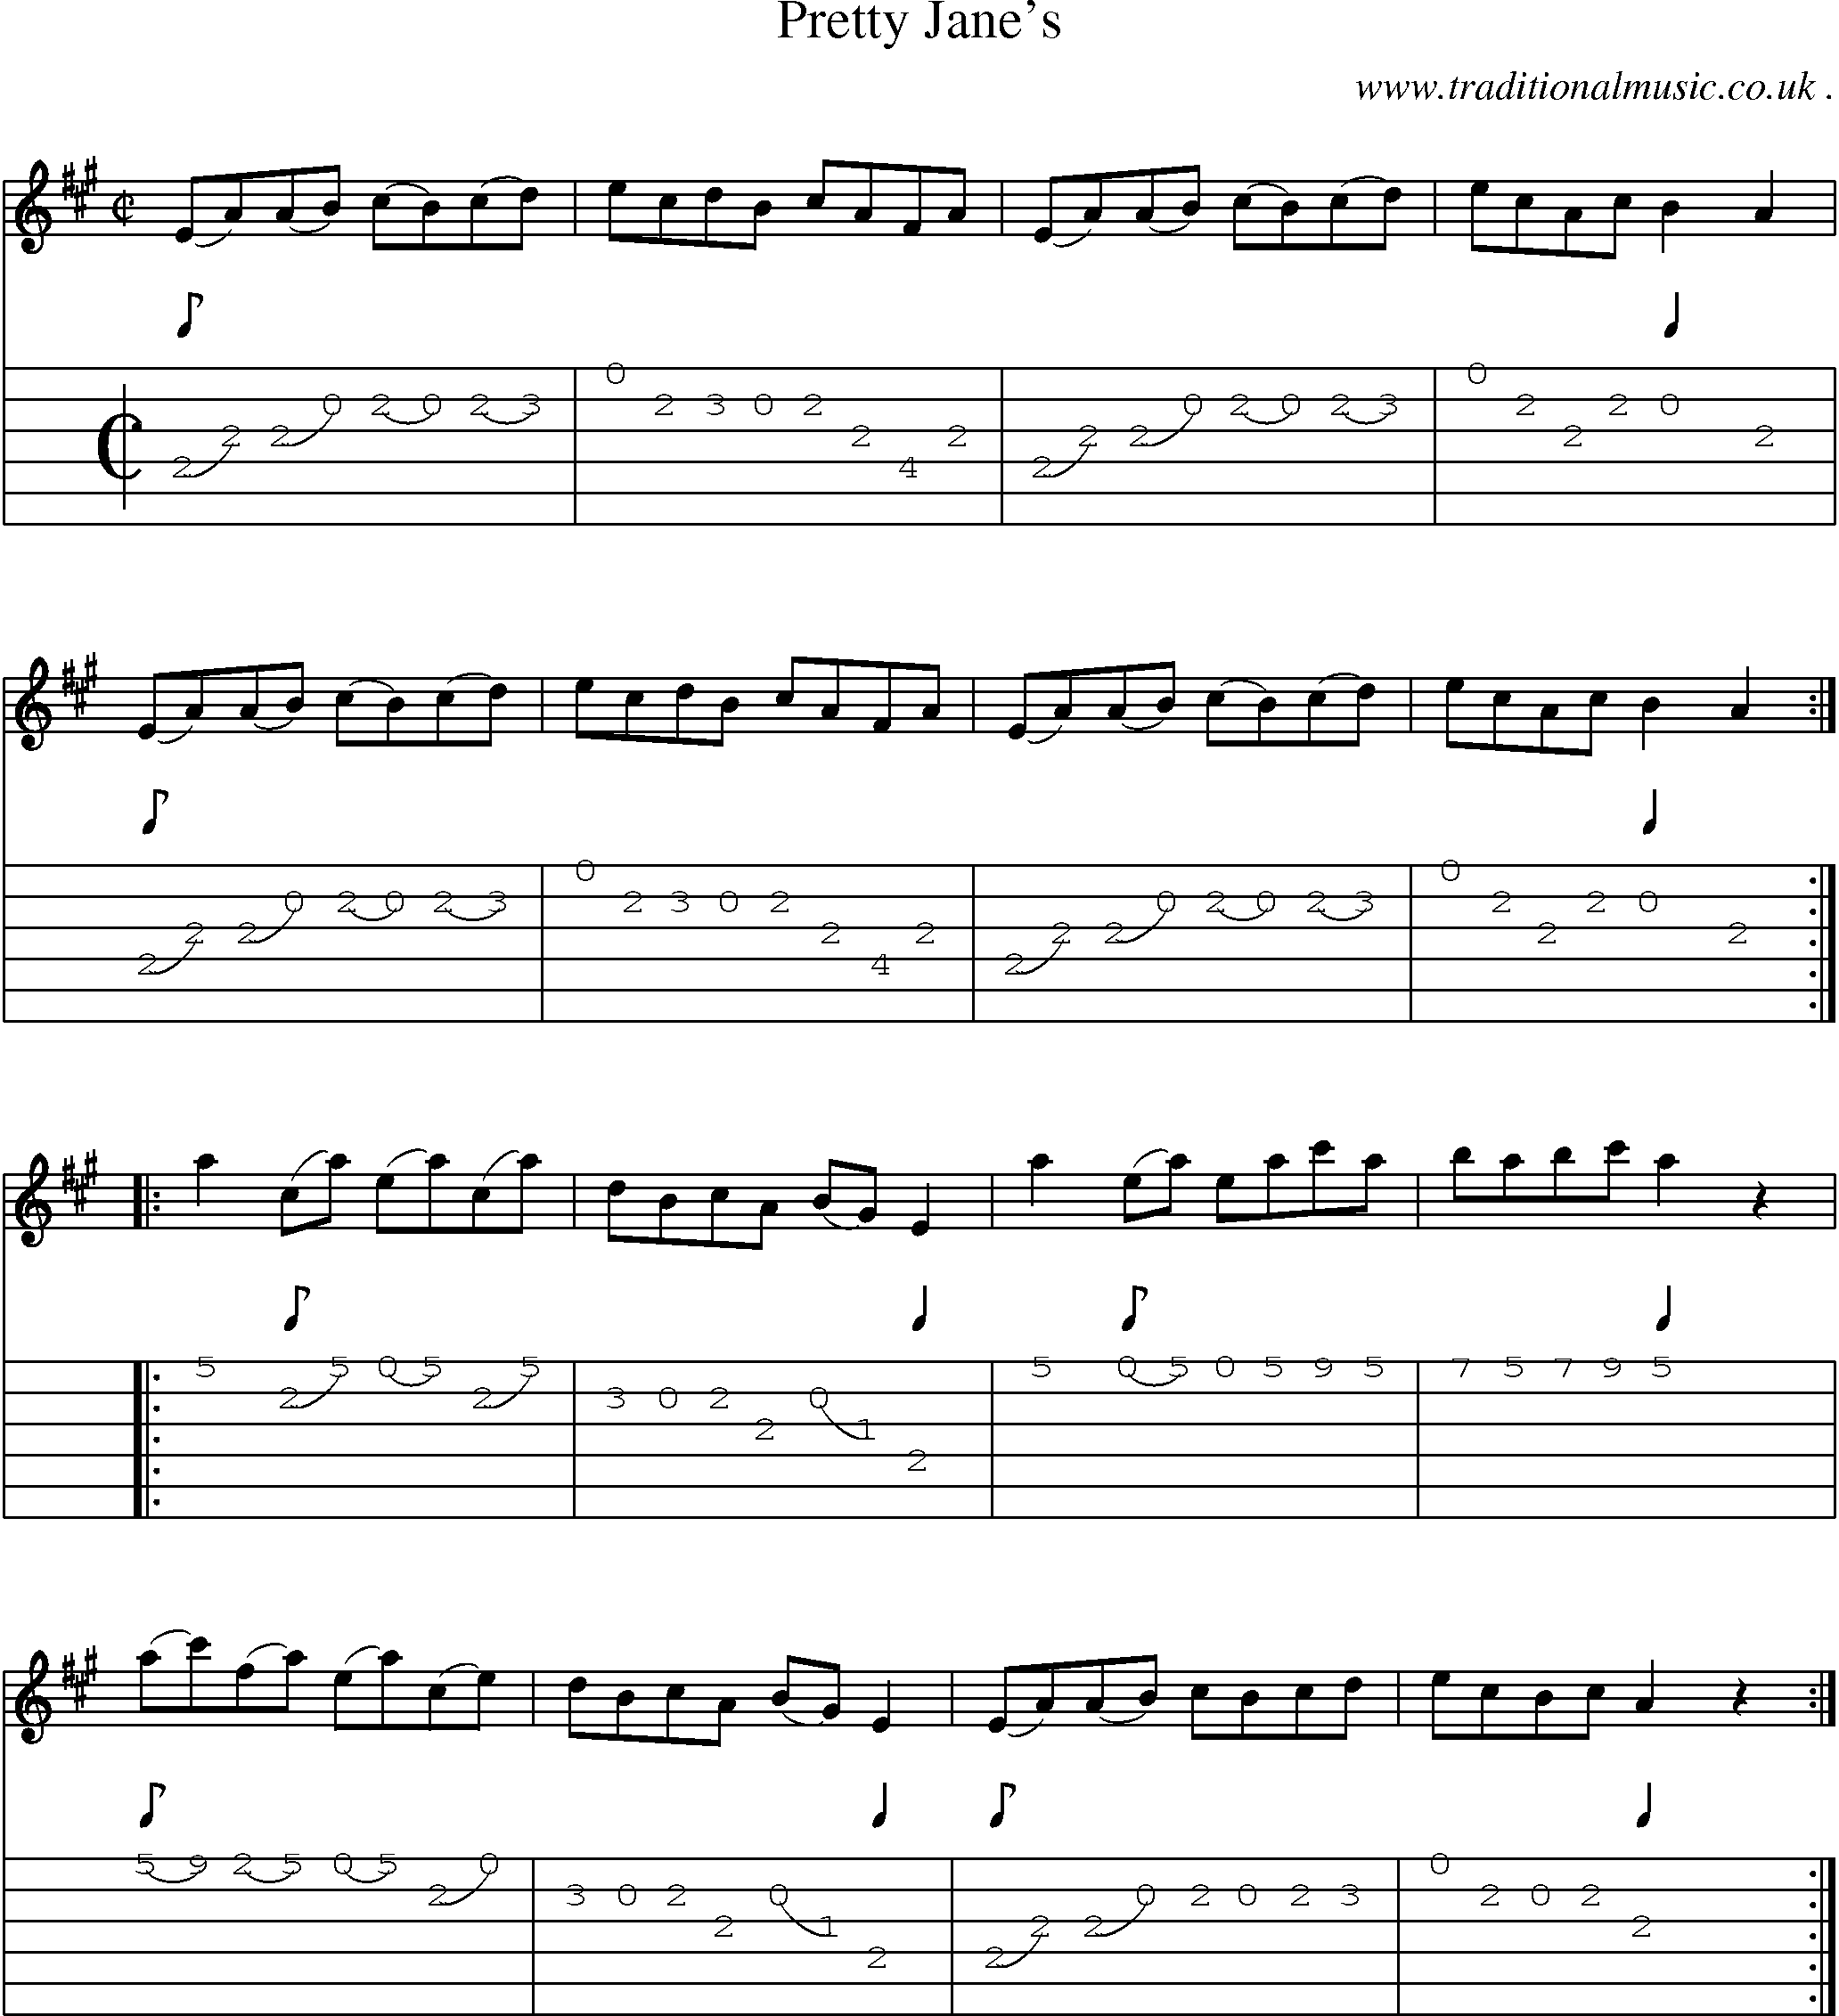 Sheet-Music and Guitar Tabs for Pretty Janes